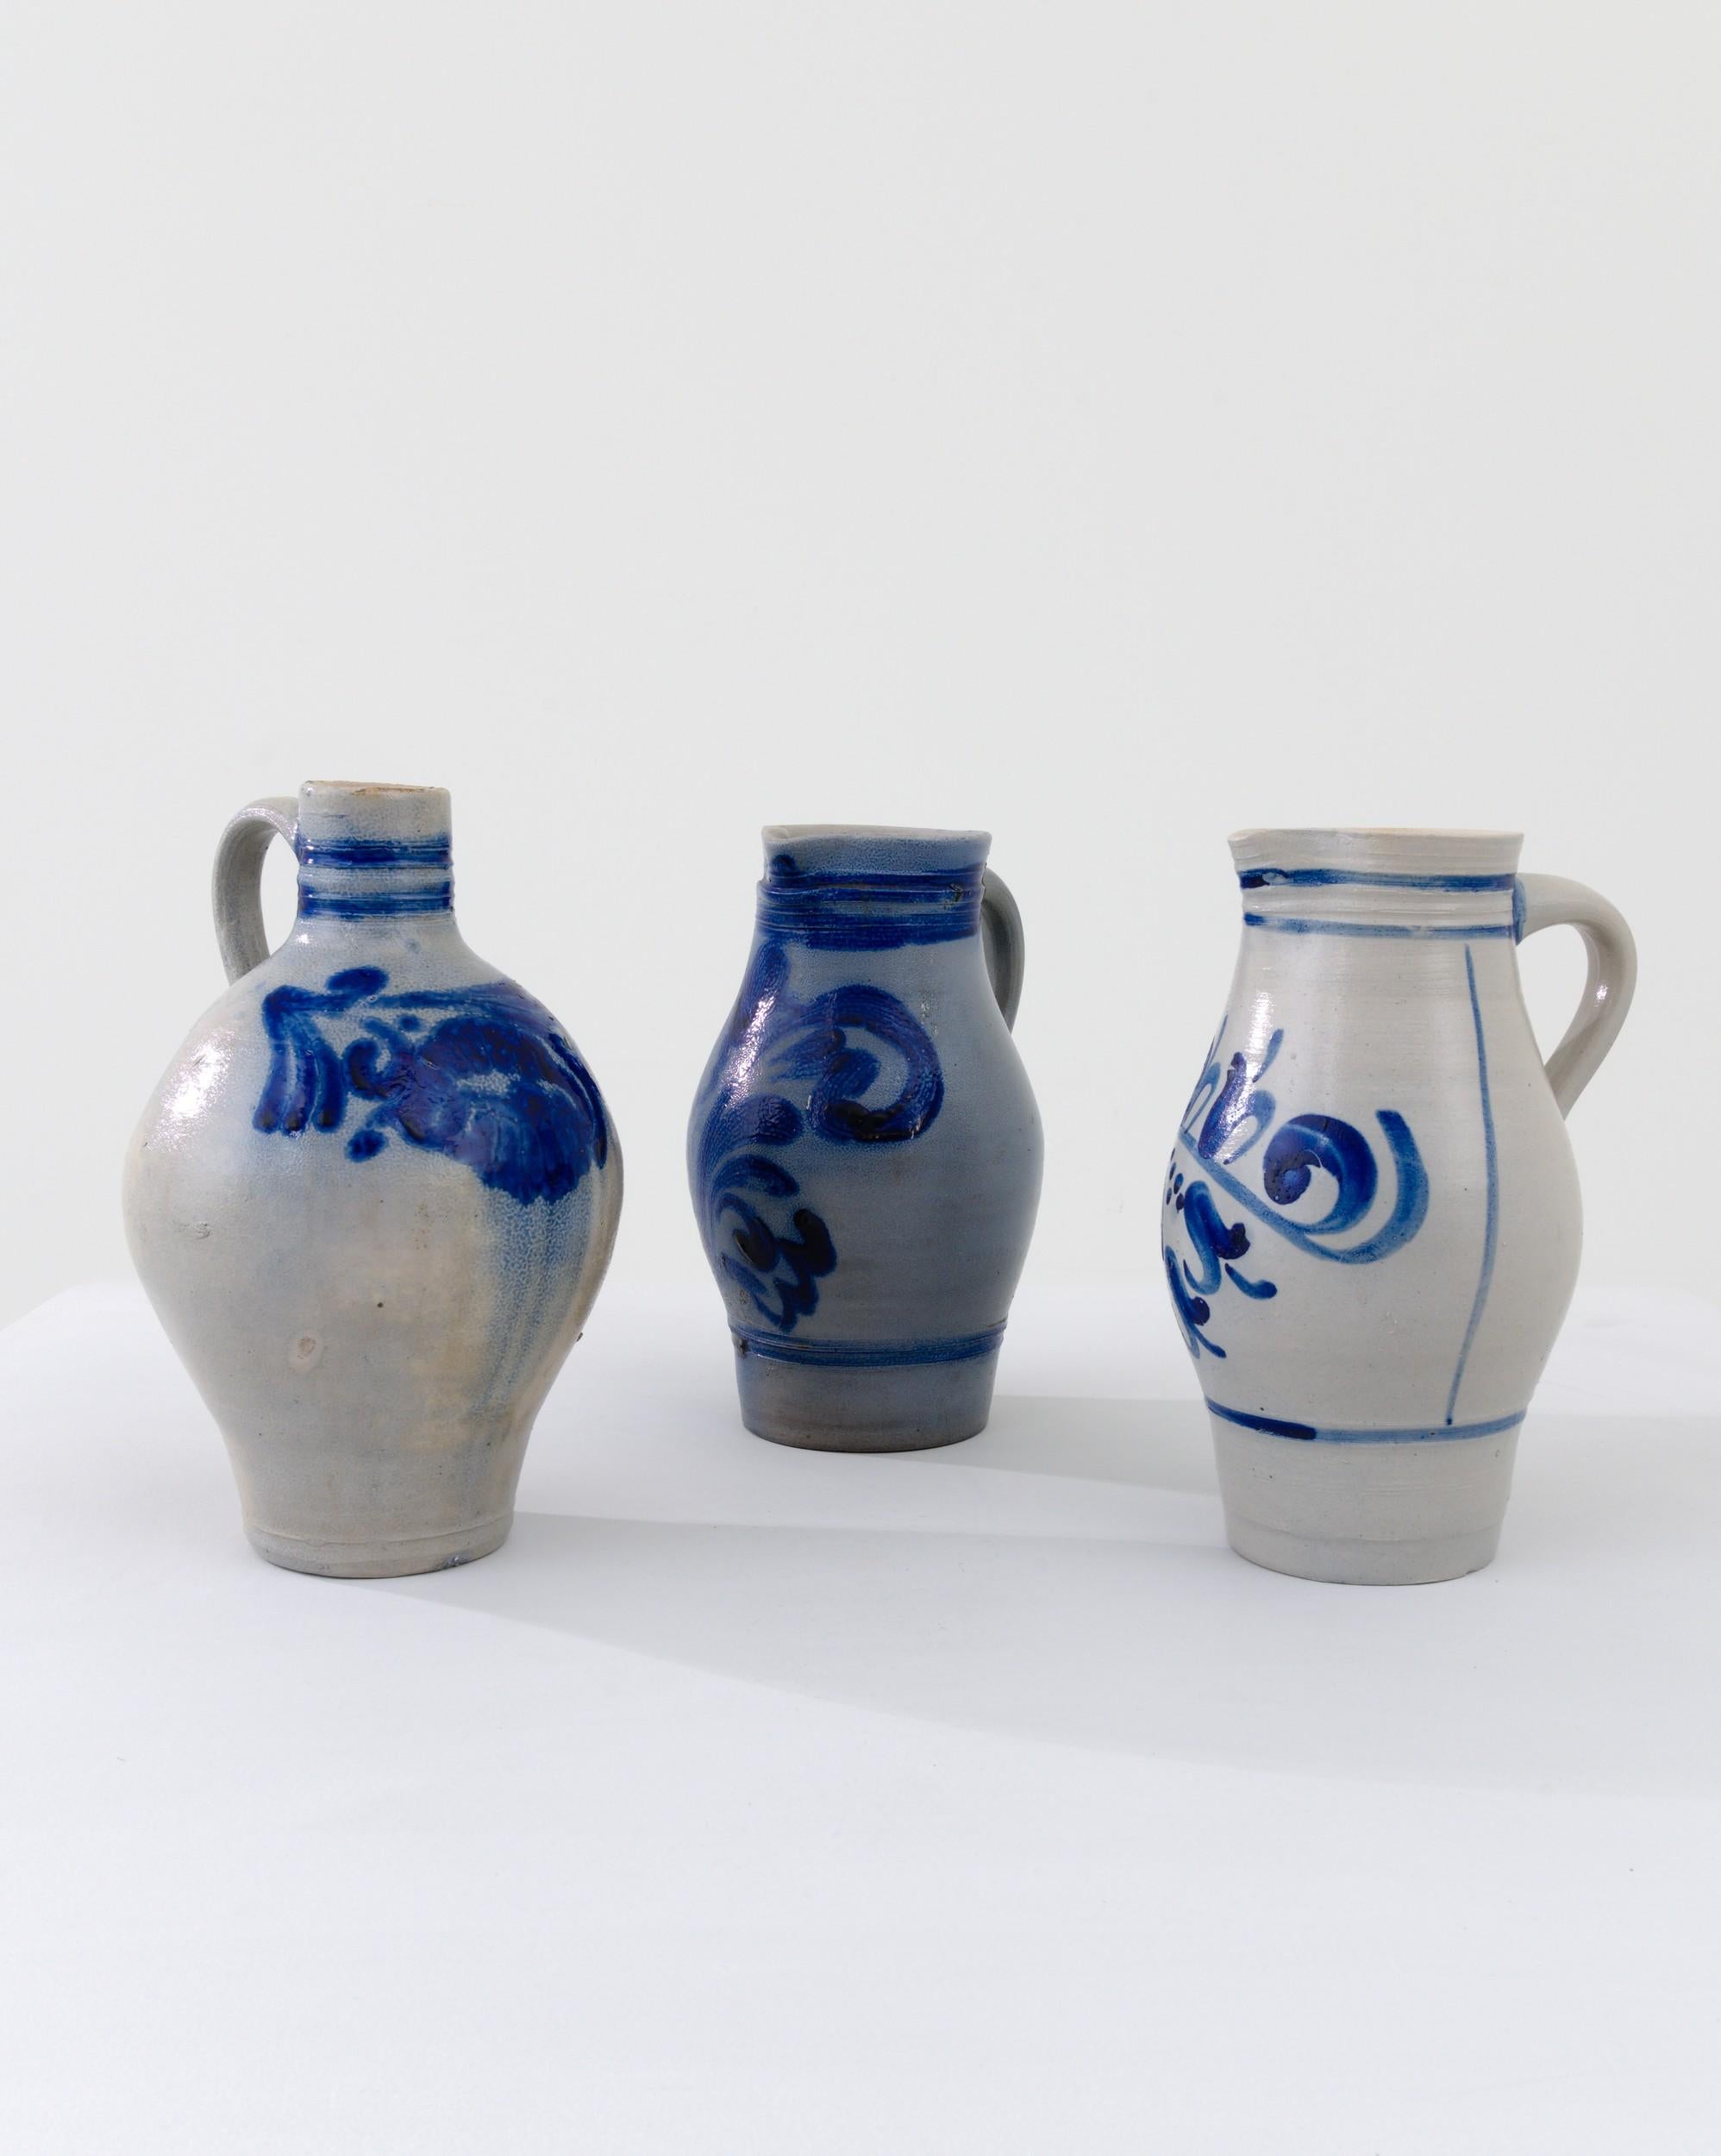 These three typical country pots are finished with a distinctive vivid blue salt glaze, enhancing the rounded clay base with a charming nature inspired motif. The dominant form of storage for food or agricultural purposes for thousands of years,